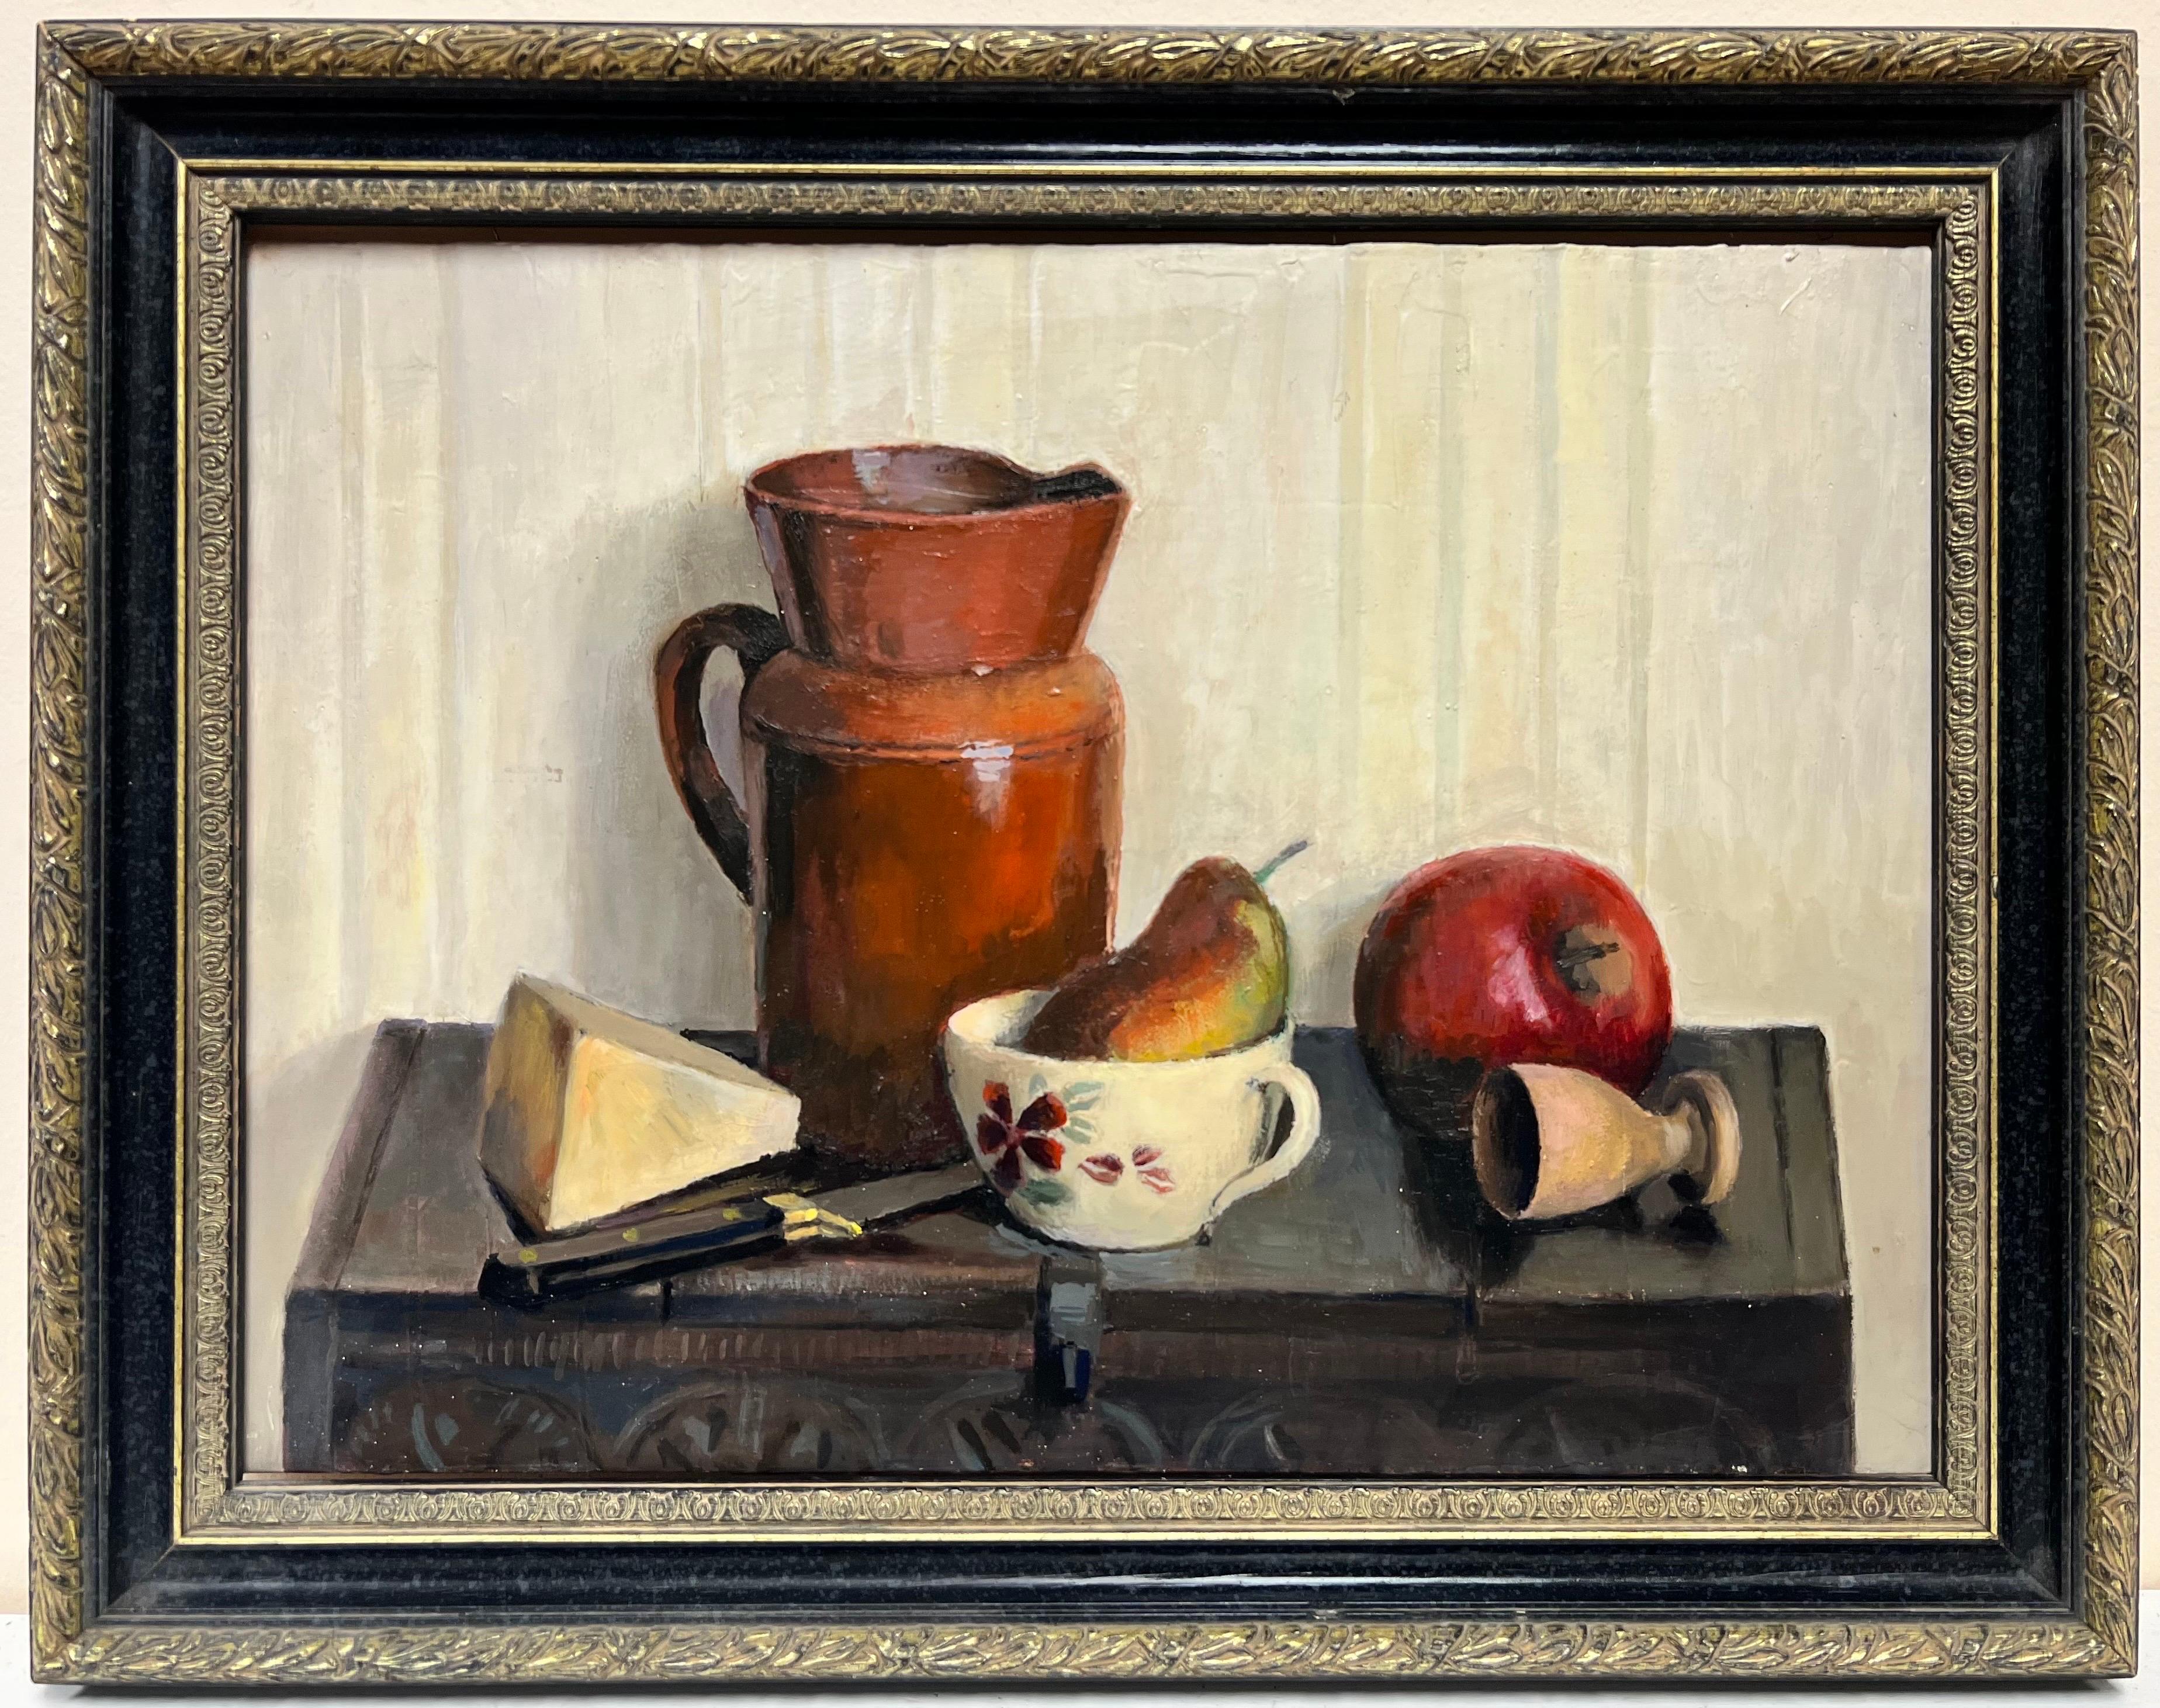 20th Century French Interior Painting - Fine French Still Life Interior Scene Fruit & Table Top Items, Beautiful Details